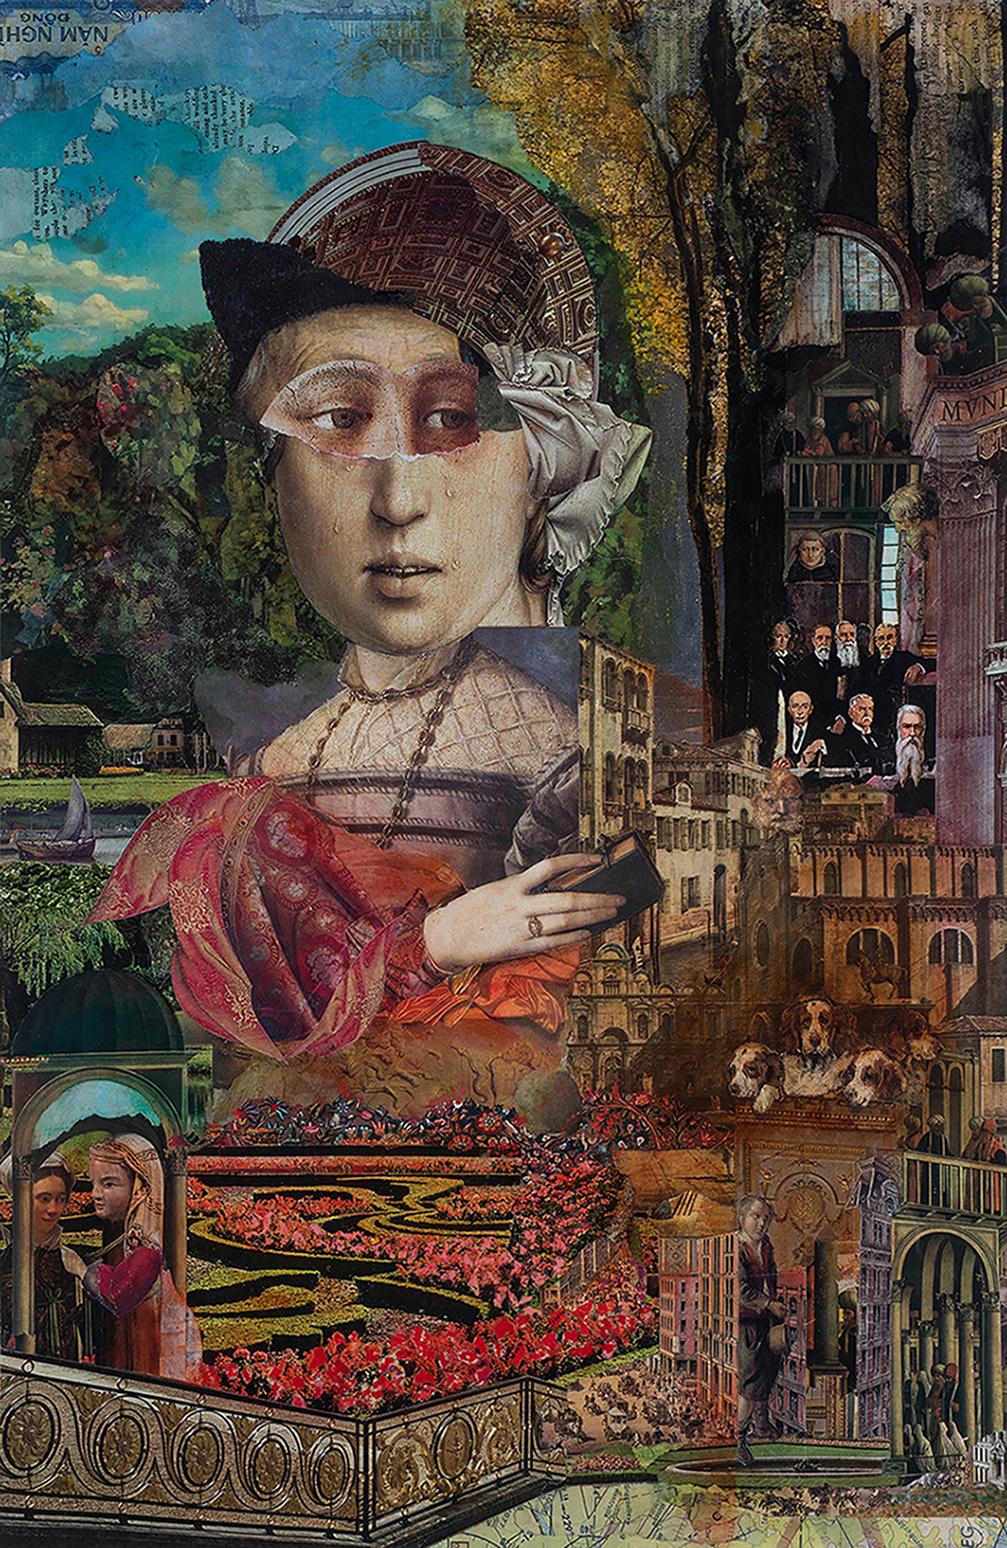 Surreal Collage: 'The Witness' - Mixed Media Art by David Barnett